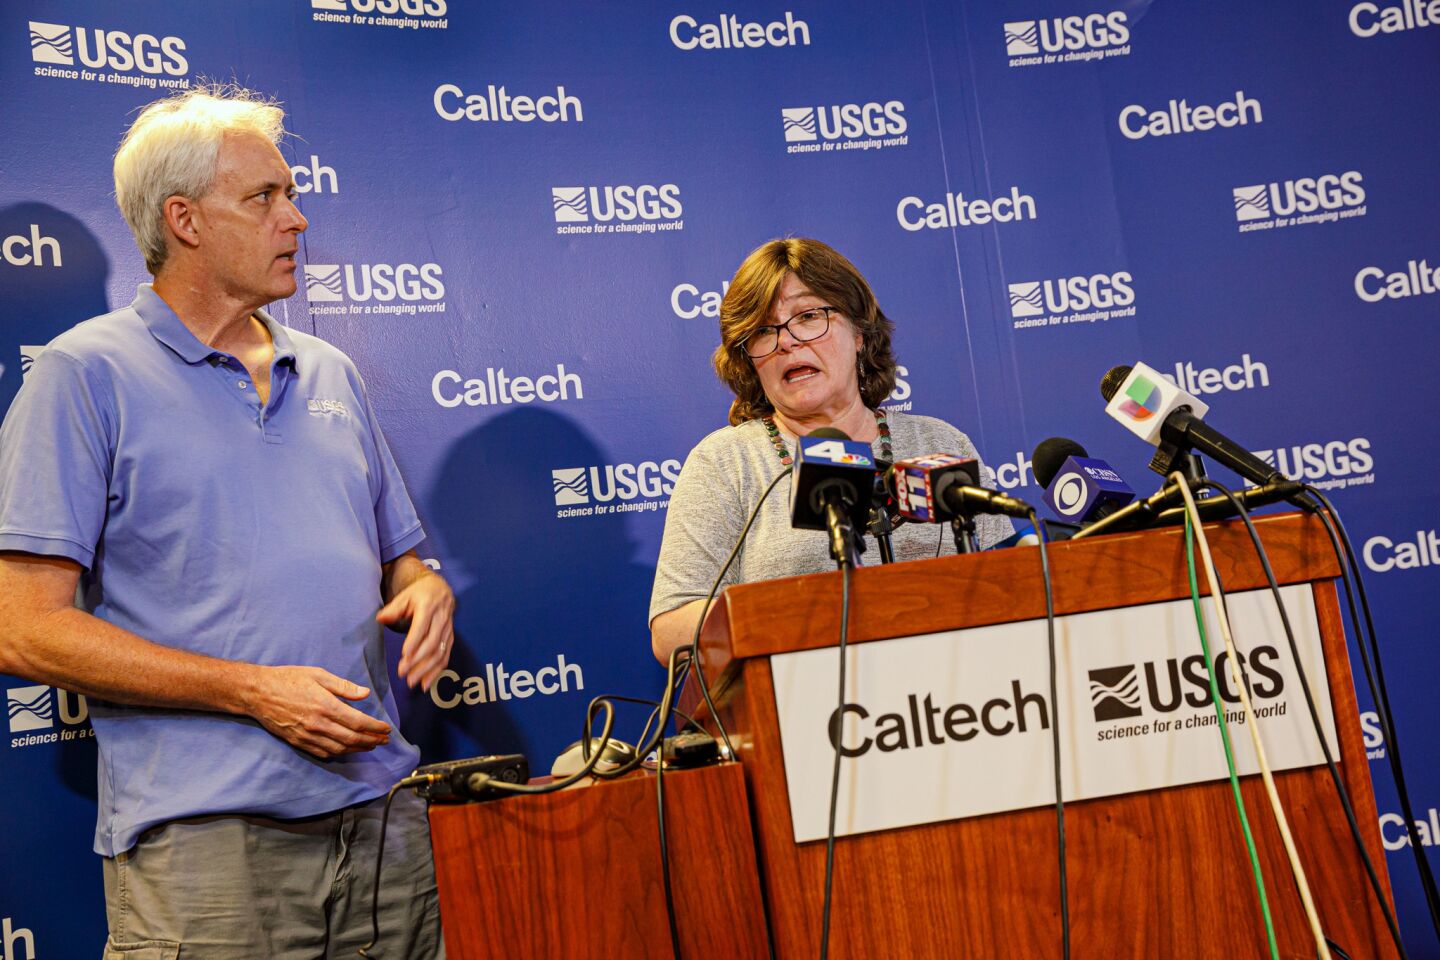 Seismologists Robert Graves and Lucy Jones speak at a news conference at Caltech in Pasadena in response to the 6.4 magnitude earthquake that struck near Ridgecrest, Calif.